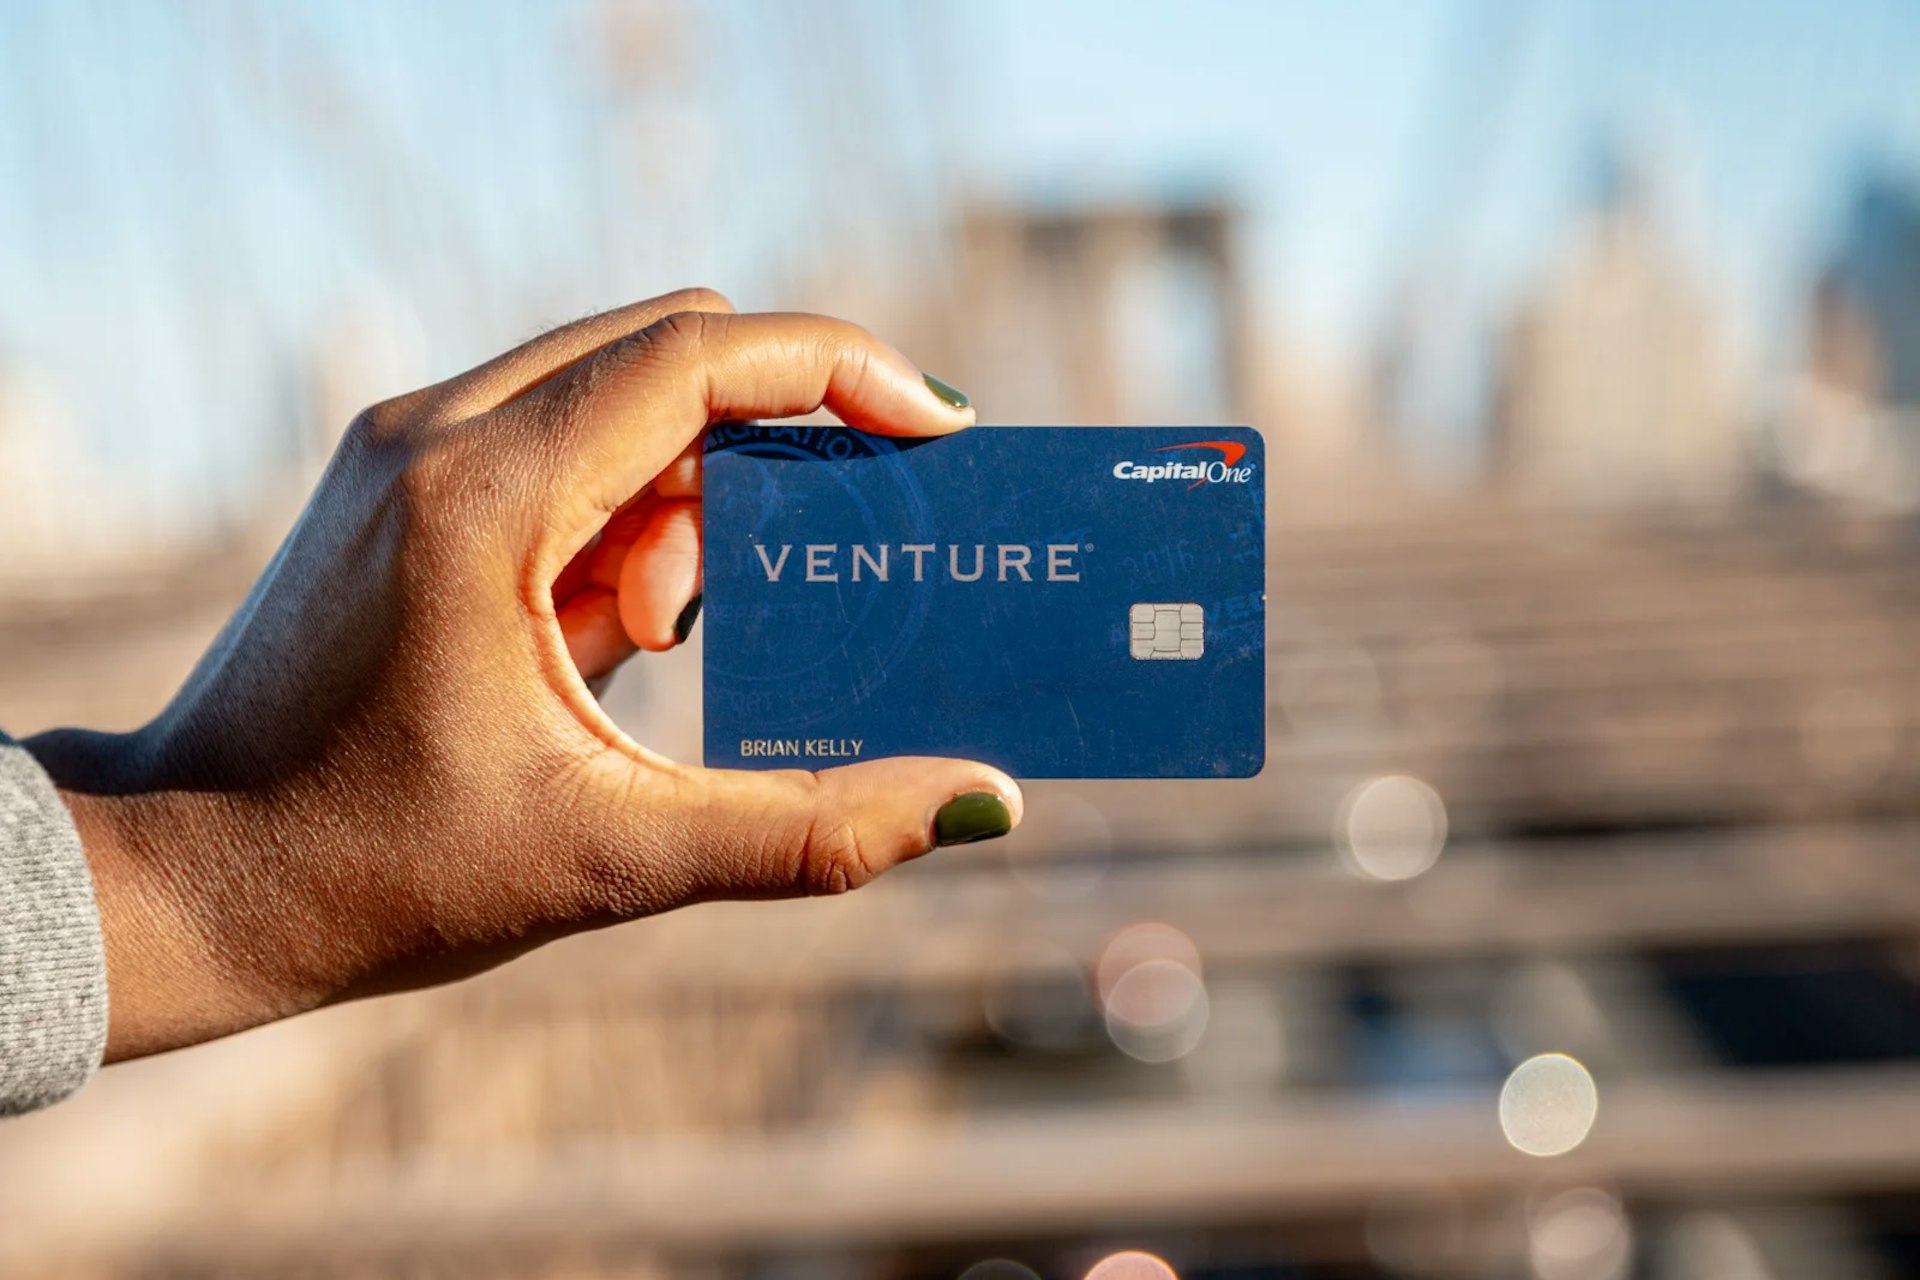 The Capital One Venture Card